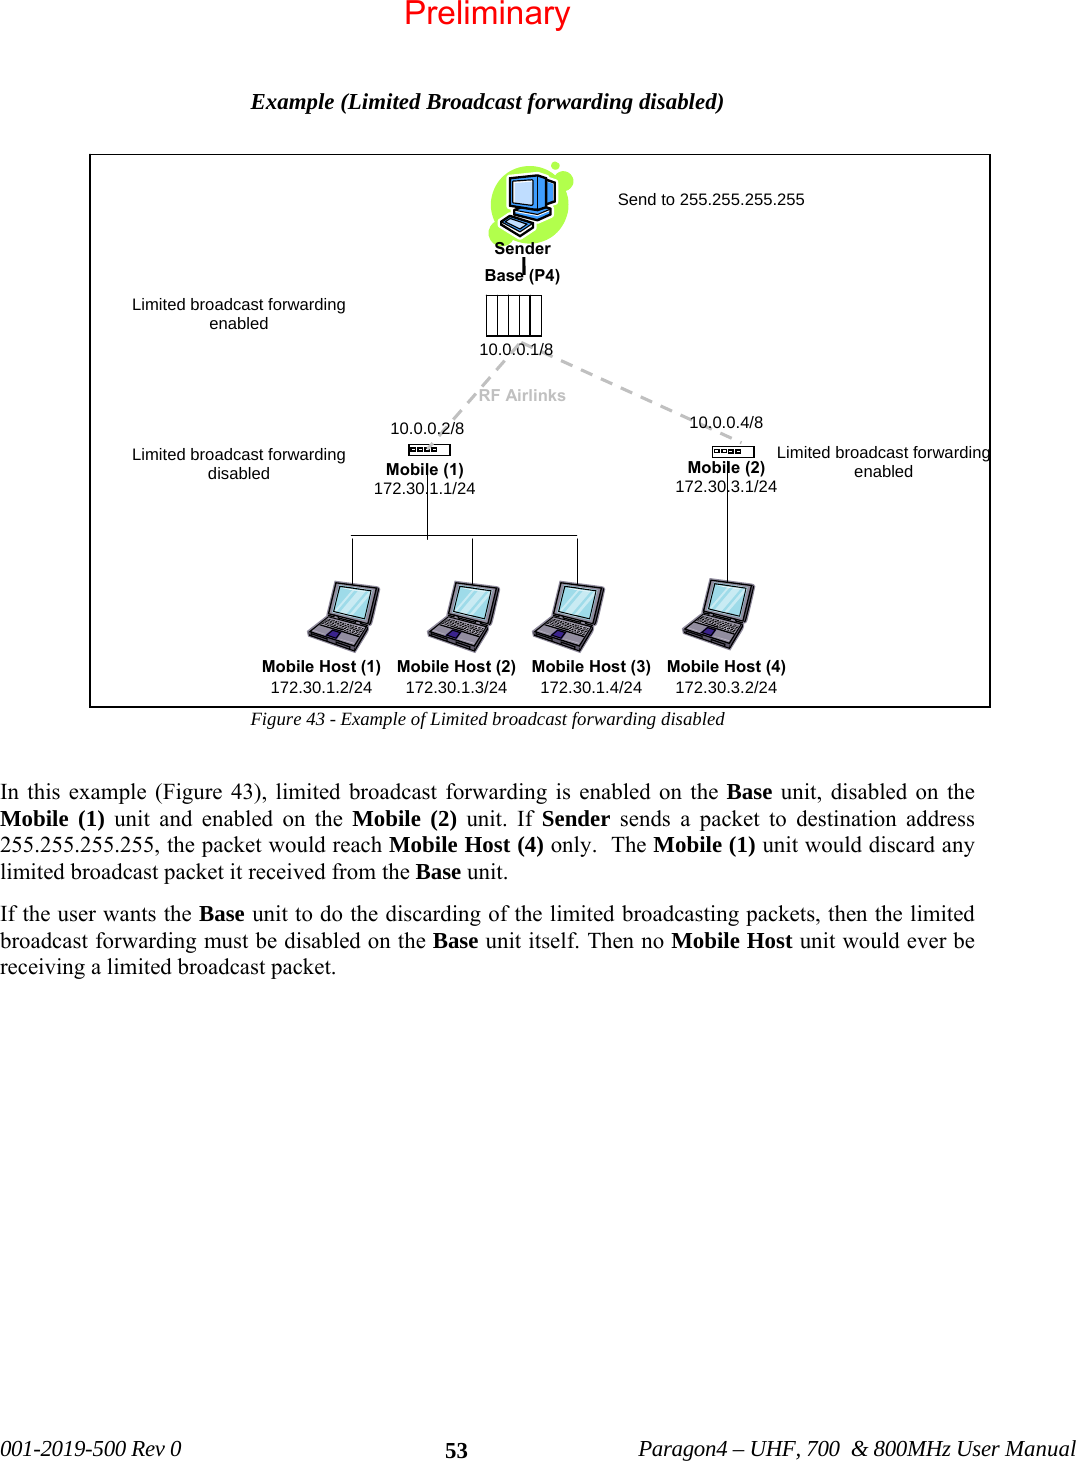   001-2019-500 Rev 0          Paragon4 – UHF, 700  &amp; 800MHz User Manual   53 Example (Limited Broadcast forwarding disabled)  Figure 43 - Example of Limited broadcast forwarding disabled  In this example (Figure 43), limited broadcast forwarding is enabled on the Base unit, disabled on the Mobile (1) unit and enabled on the Mobile (2) unit. If Sender sends a packet to destination address 255.255.255.255, the packet would reach Mobile Host (4) only.  The Mobile (1) unit would discard any limited broadcast packet it received from the Base unit.   If the user wants the Base unit to do the discarding of the limited broadcasting packets, then the limited broadcast forwarding must be disabled on the Base unit itself. Then no Mobile Host unit would ever be receiving a limited broadcast packet.      Base (P4) RF AirlinksMobile Host (2)172.30.1.3/24Mobile Host (3)172.30.1.4/24Mobile (1) 172.30.1.1/24Mobile (2) 172.30.3.1/24 Mobile Host (1)172.30.1.2/24Mobile Host (4) 172.30.3.2/24 10.0.0.1/8 10.0.0.4/8 Limited broadcast forwarding enabled Limited broadcast forwarding disabled Send to 255.255.255.255 Limited broadcast forwarding enabled Sender  10.0.0.2/8 Preliminary